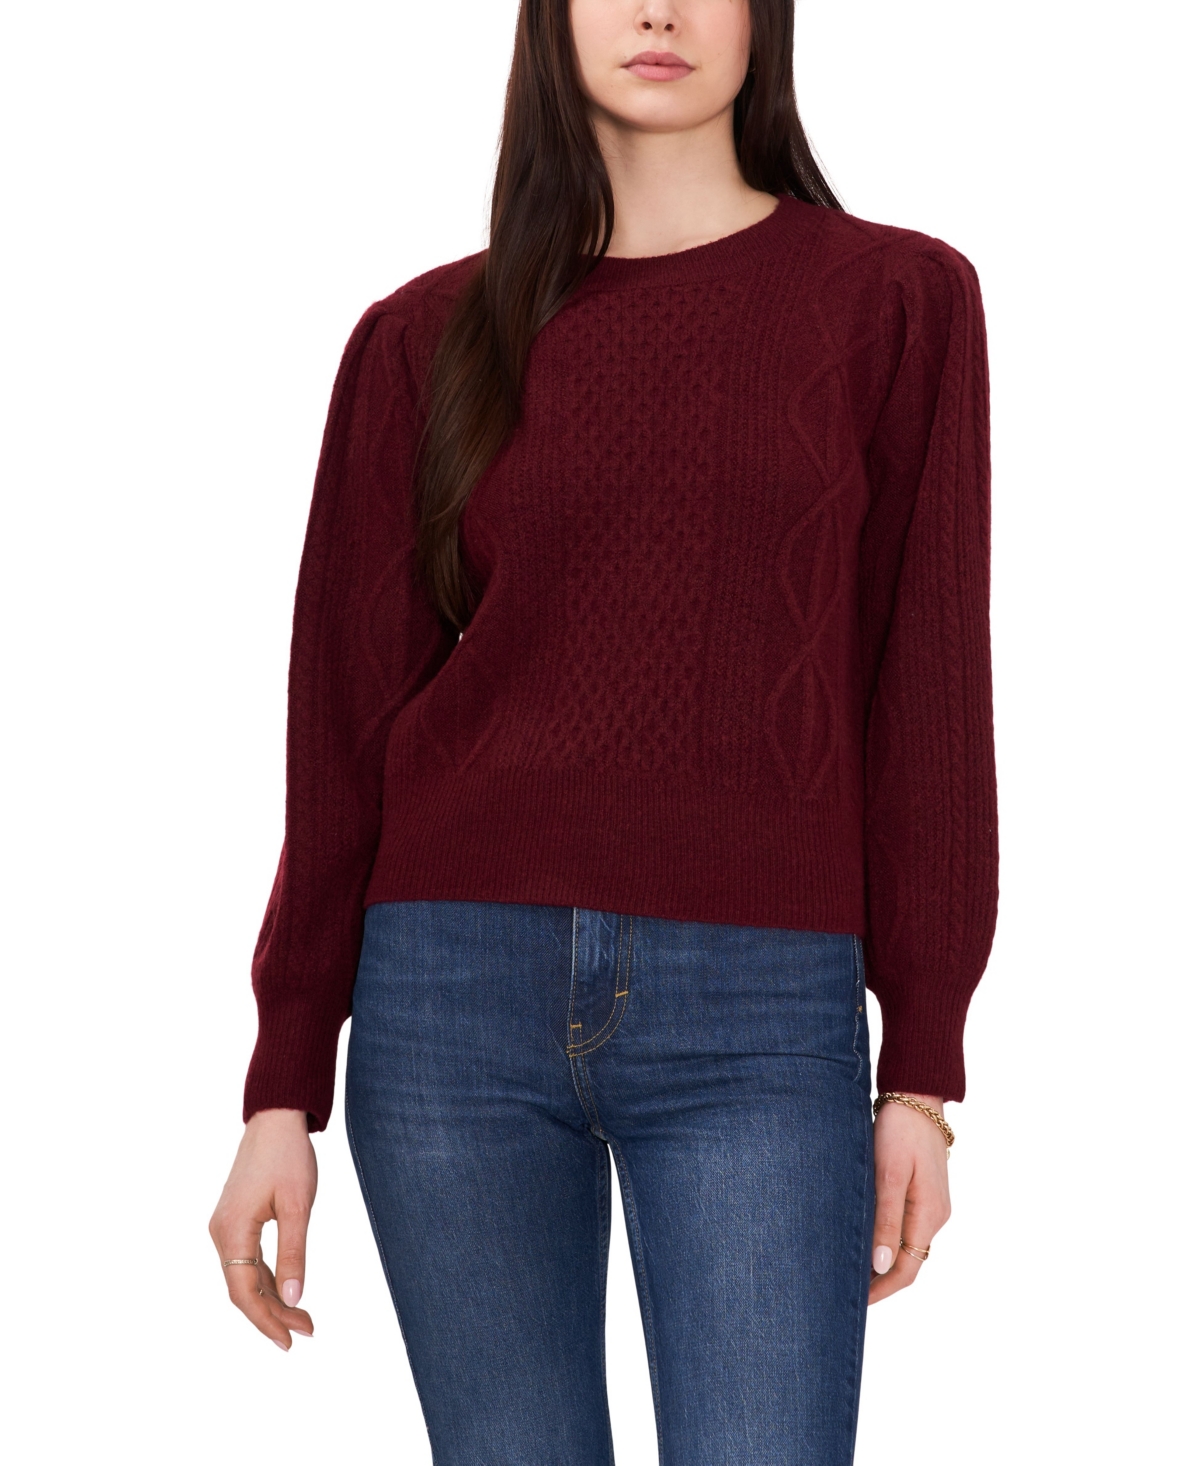 Shop 1.state Women's Variegated Cables Crew Neck Sweater In Windsor Wine